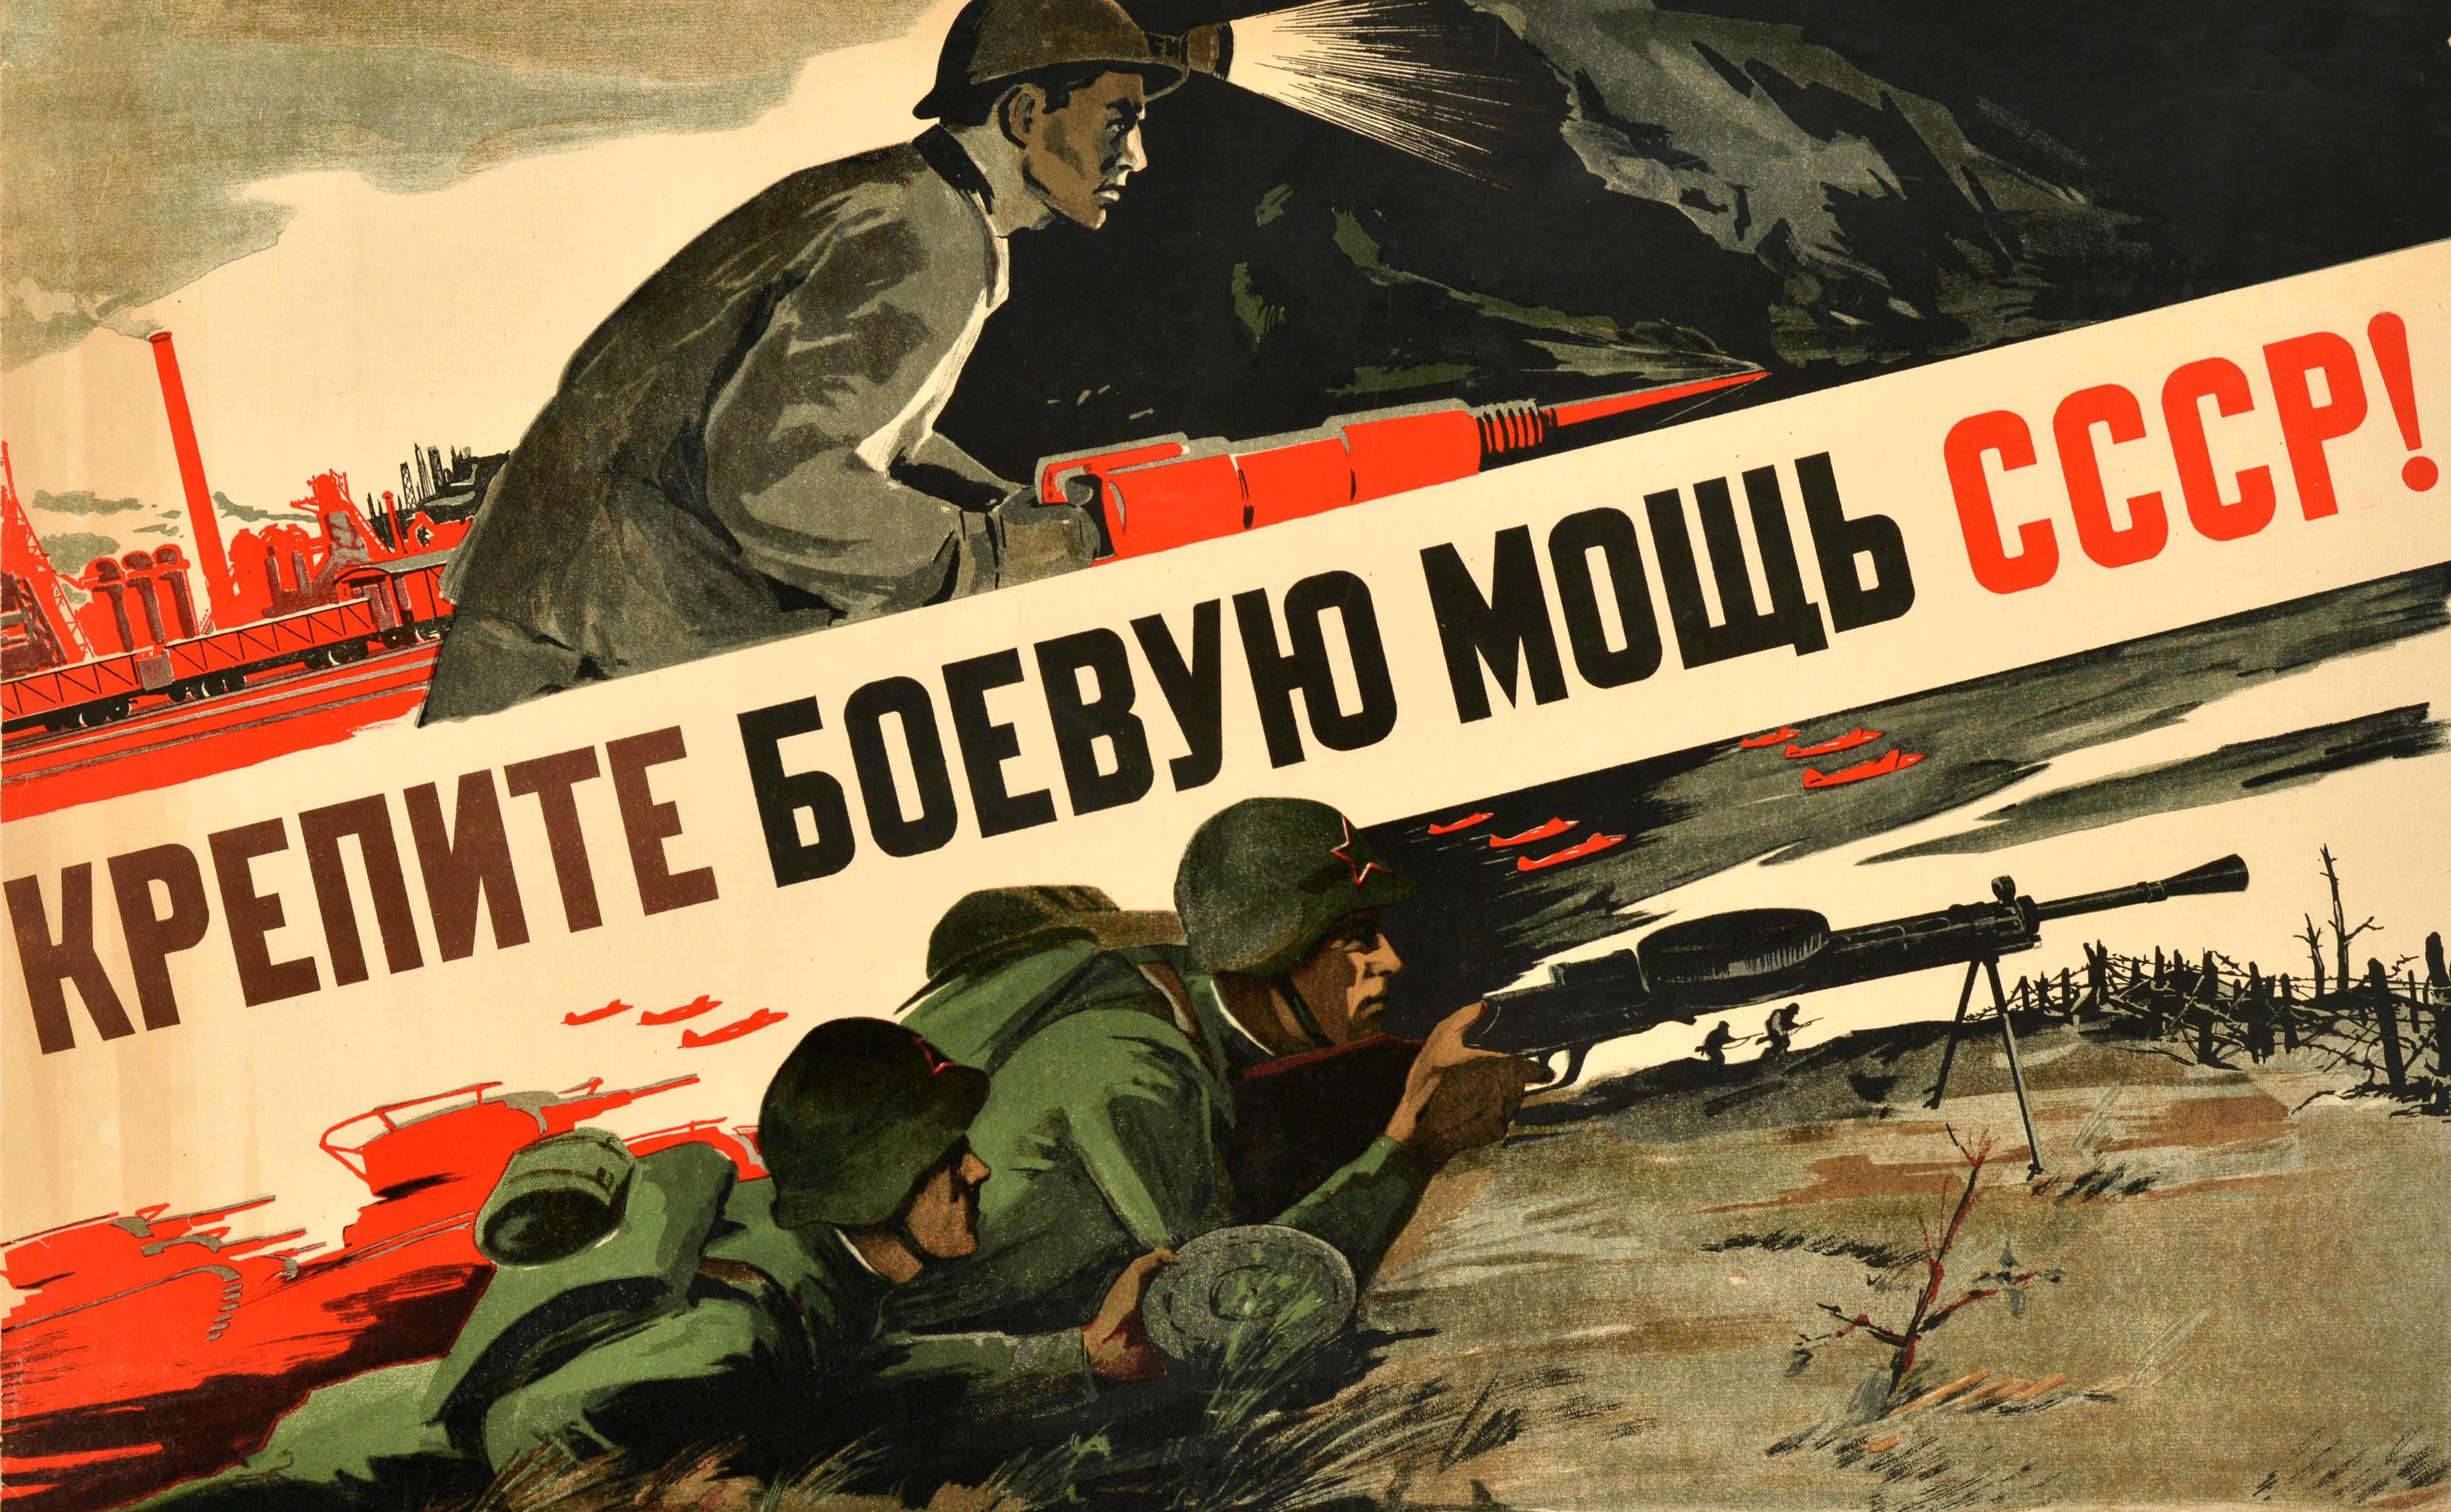 Original vintage Soviet World War Two propaganda poster - Крепите боевую мощь CCCP! / Strengthen the combat power of the USSR - featuring two illustrations divided by the bold title text diagonally in the centre, the top image showing a miner